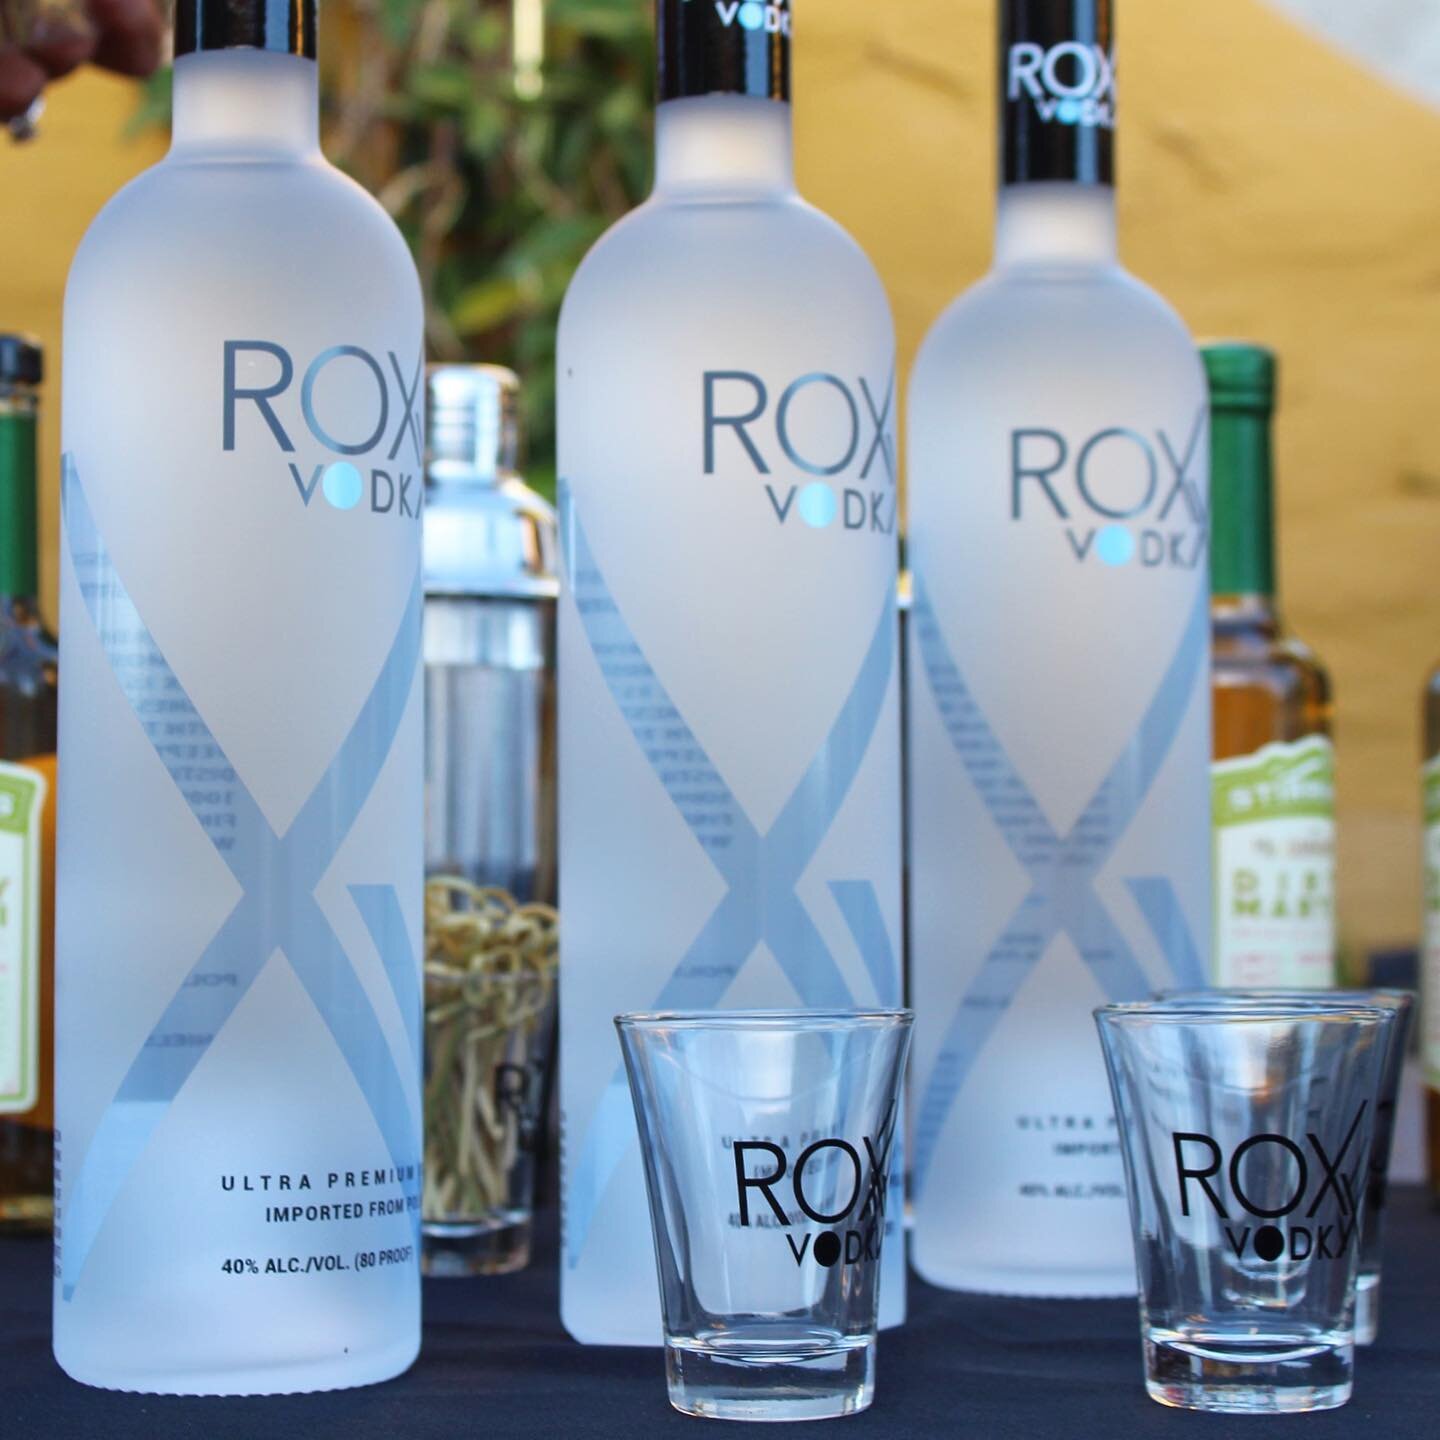 Are you ready for this holiday season?!🍁❄️🎉 Stock up on ROXX today at your local AJ&rsquo;s or get ROXX delivered straight to your door via Drizly (local) and Shop.ROXXVodka.com (we ship out of state)! ✈️🍸📦Link in bio. 

Must be 21+ to enjoy ROXX